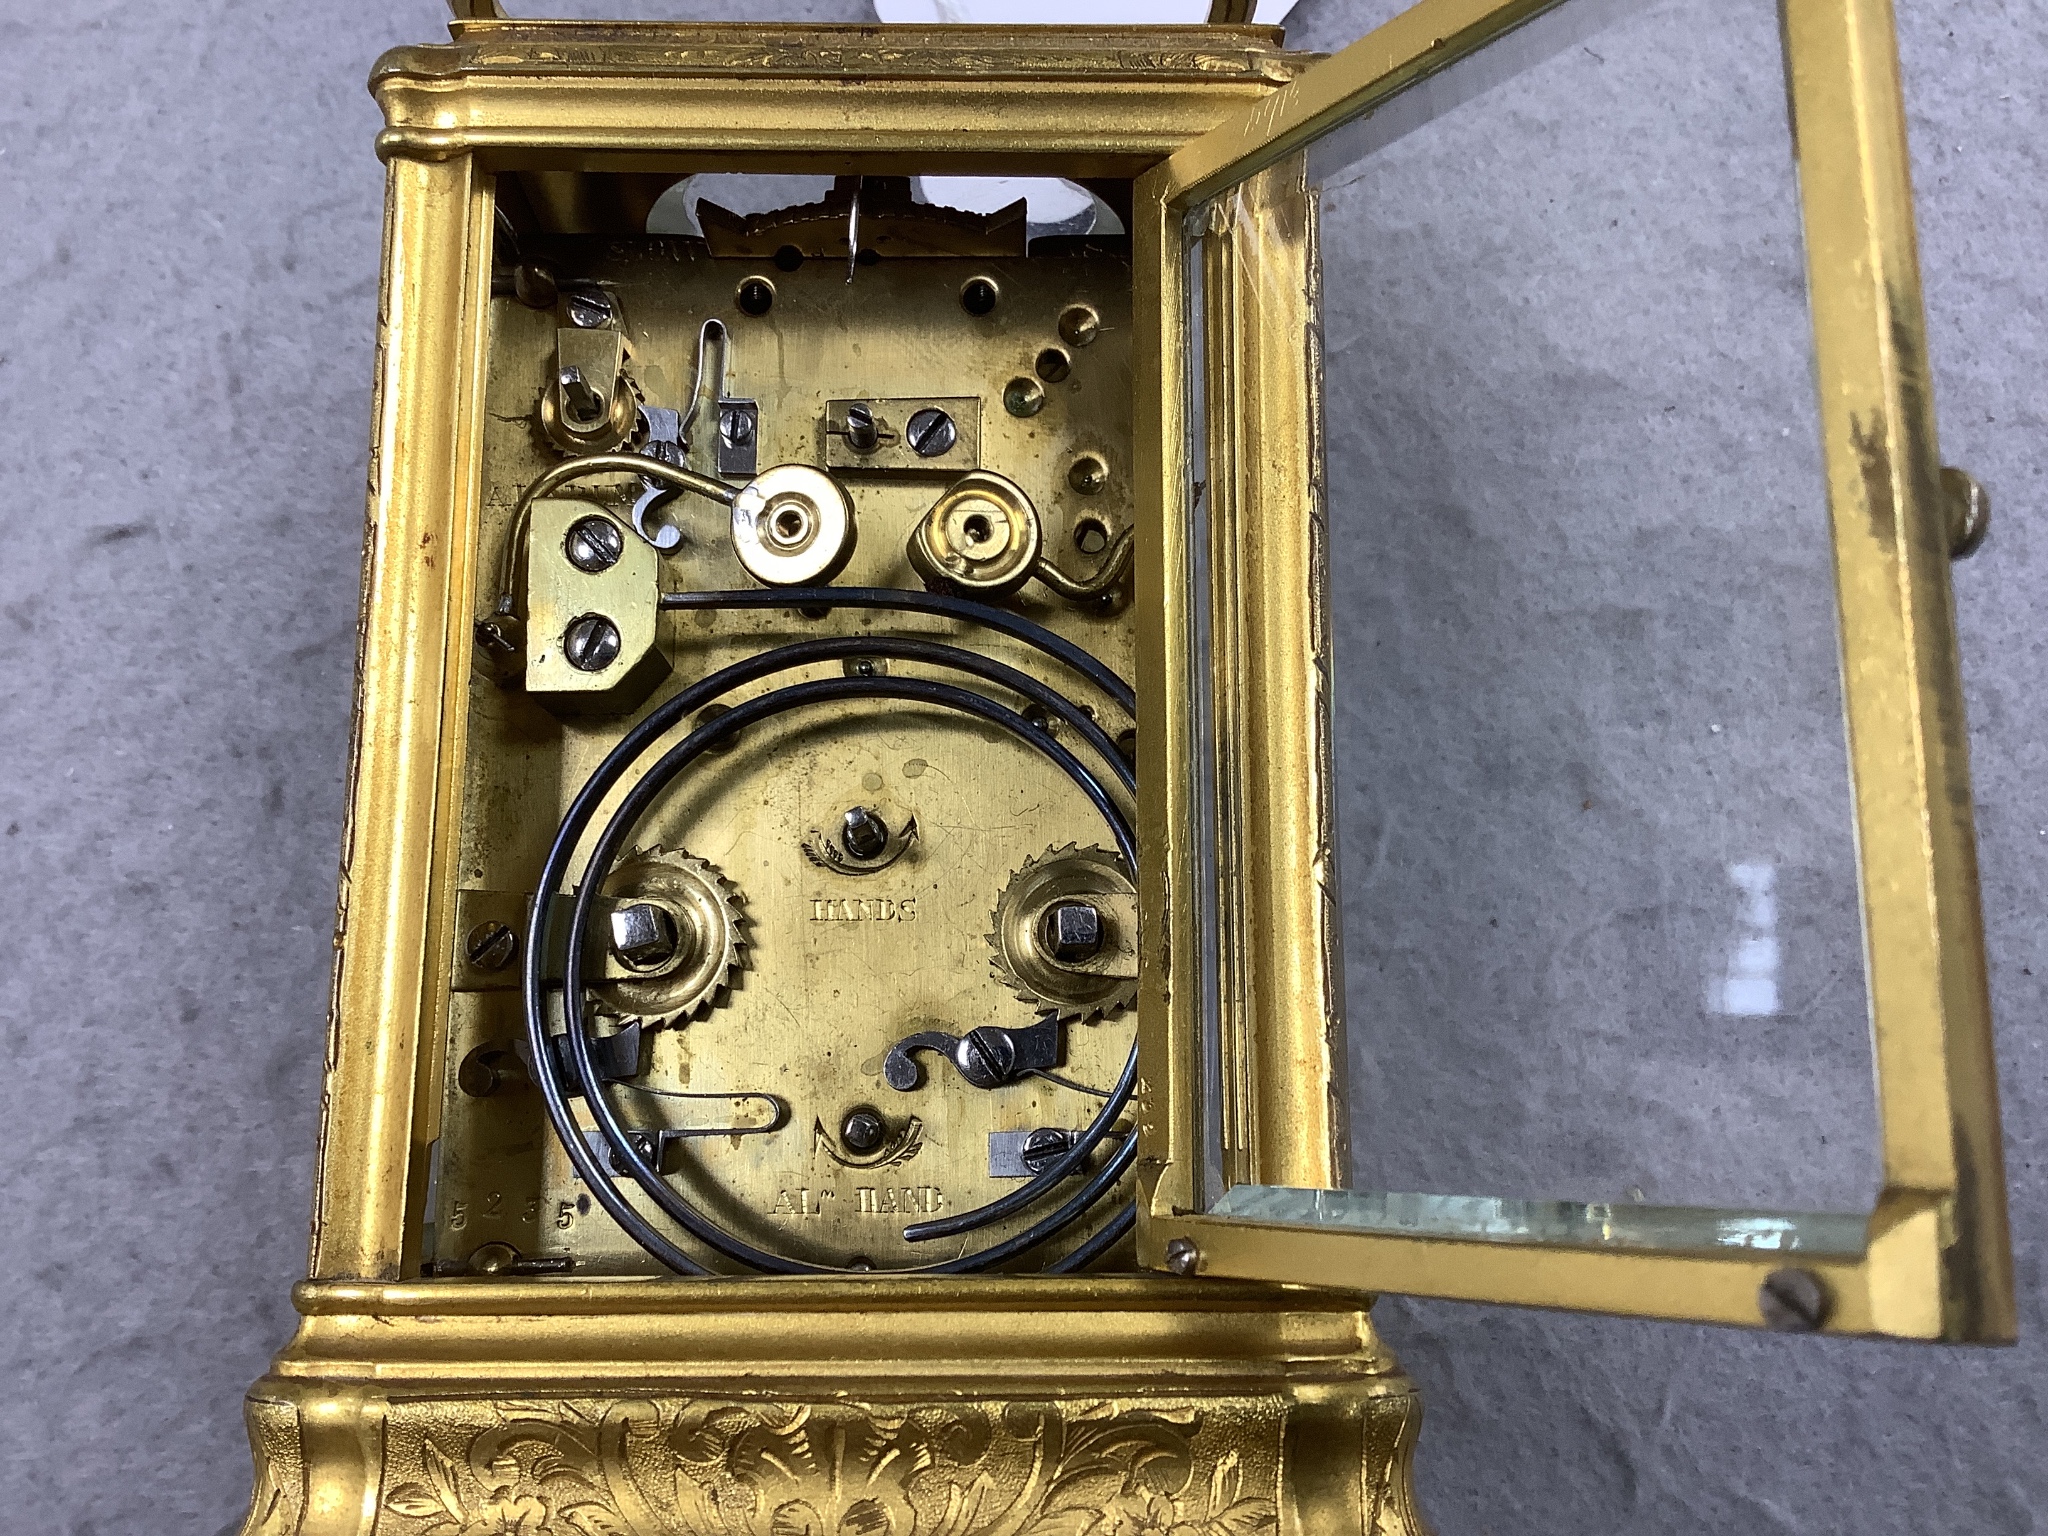 A late 19th century French engraved gilt brass gorge-cased repeating carriage clock with alarm, width 7.5cm depth 6.5cm height 11.5cm